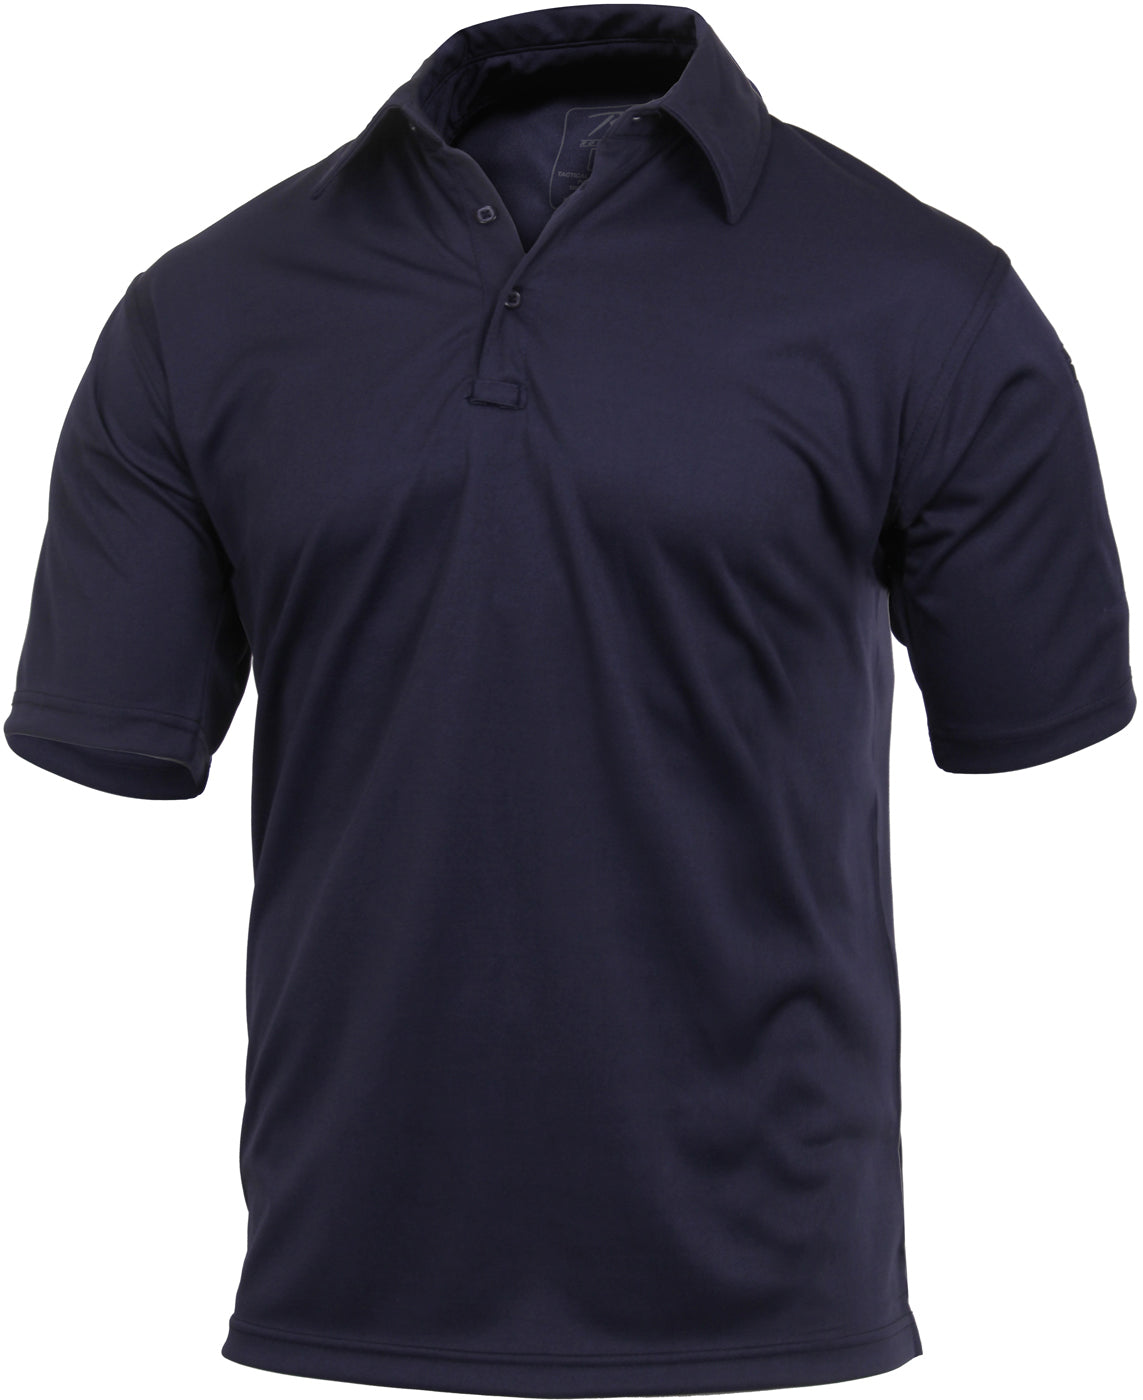 Midnight Navy Blue - Tactical Performance Polo Shirt